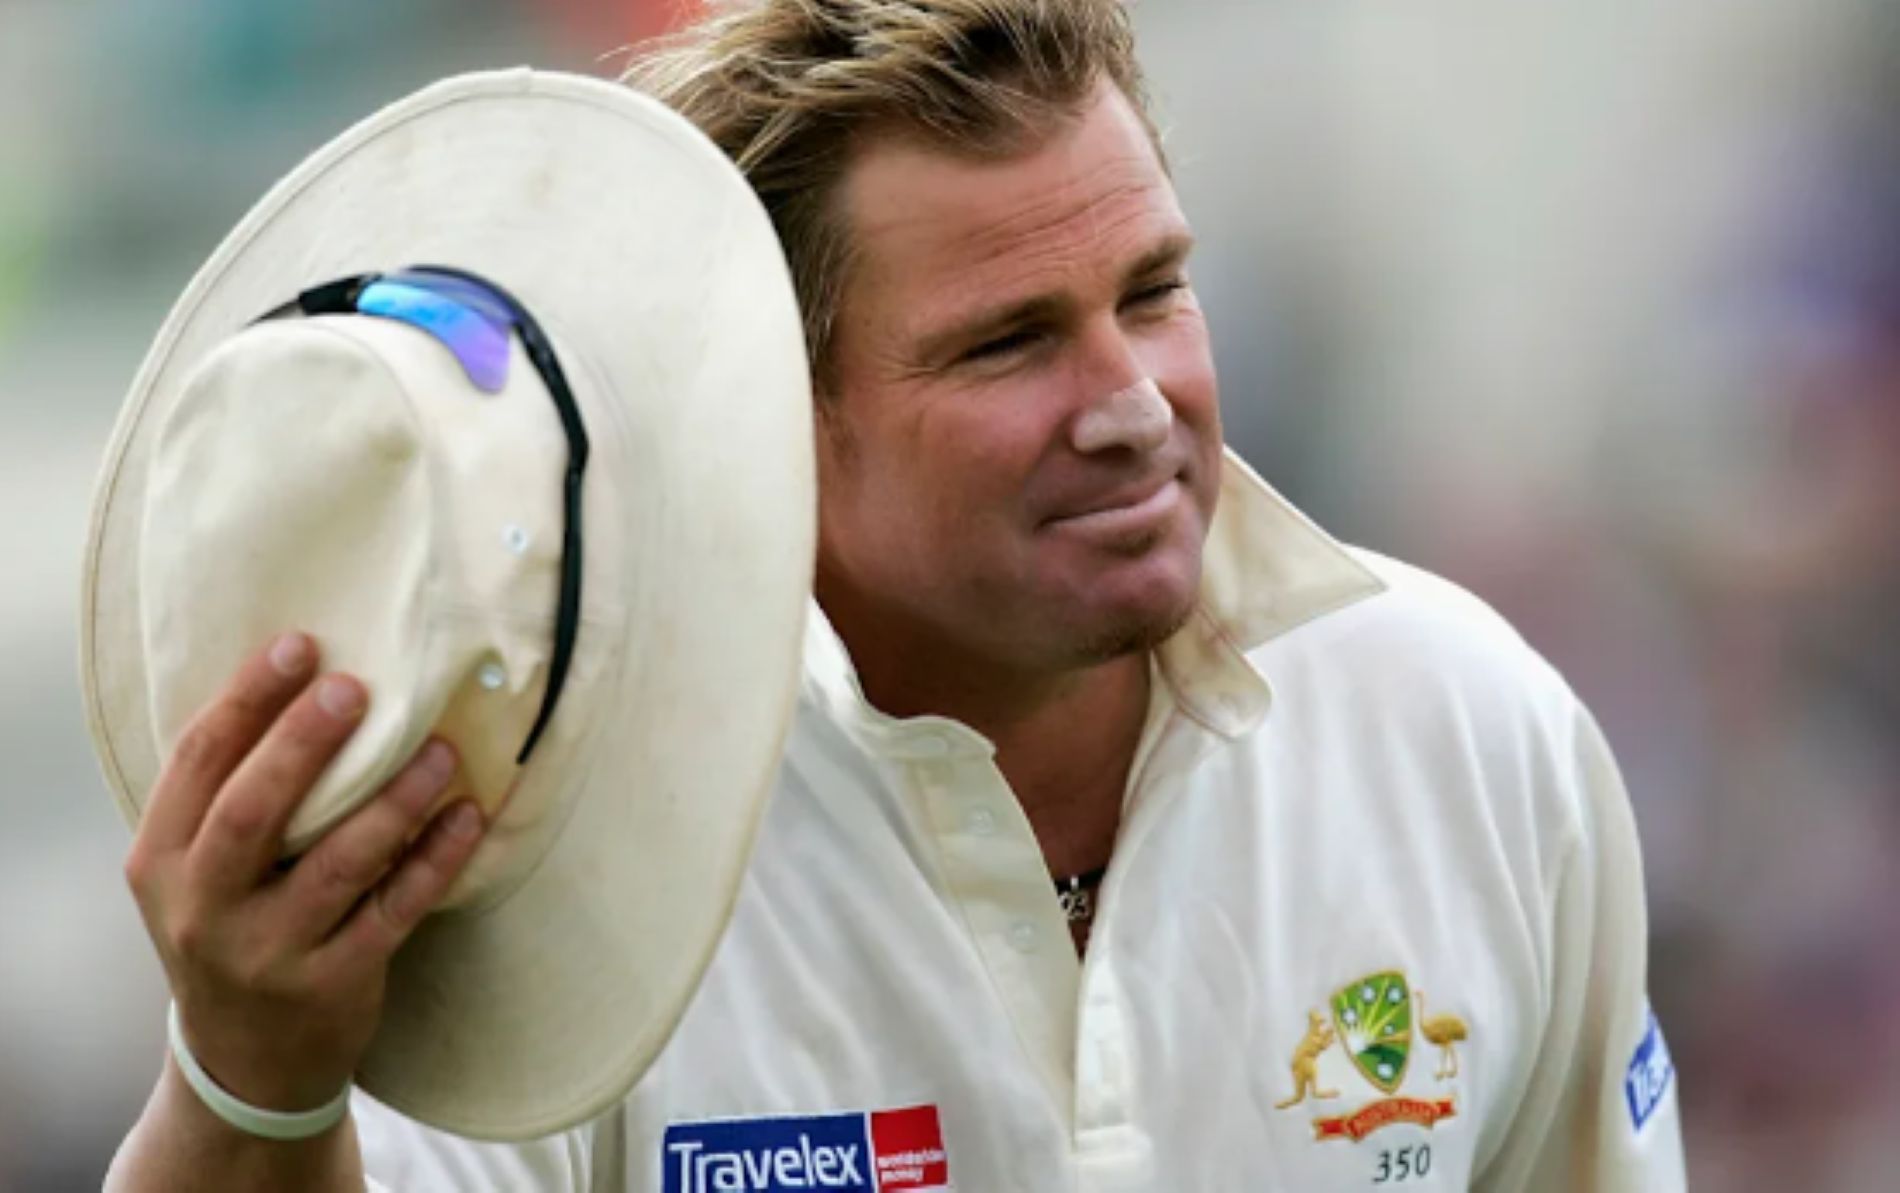 Fans will be seen with Warne